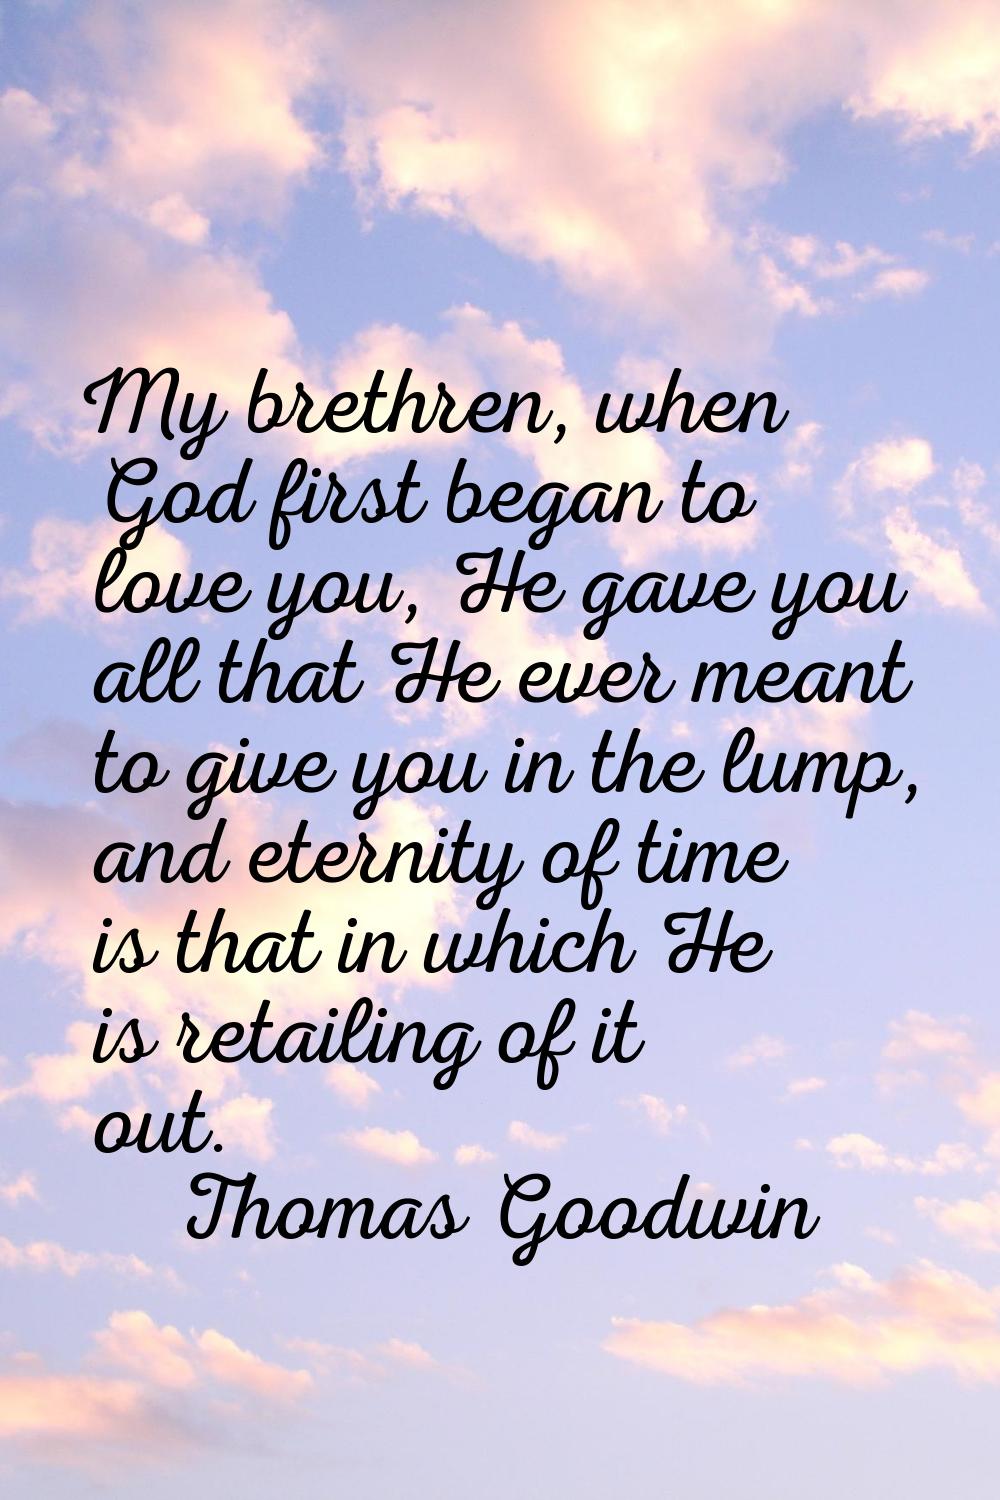 My brethren, when God first began to love you, He gave you all that He ever meant to give you in th